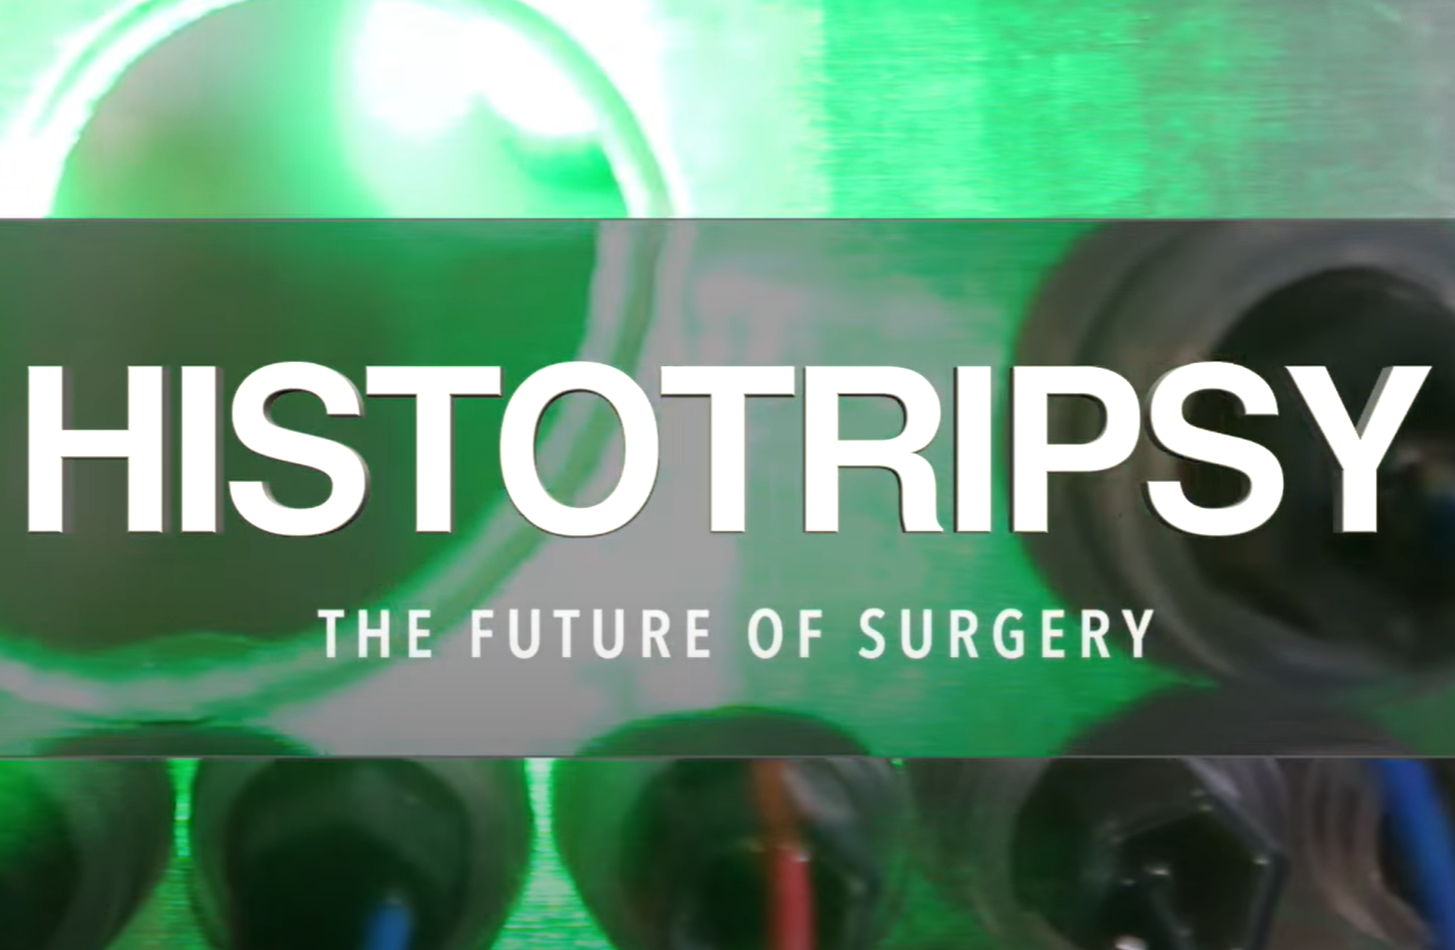 Histotripsy, the future of surgery